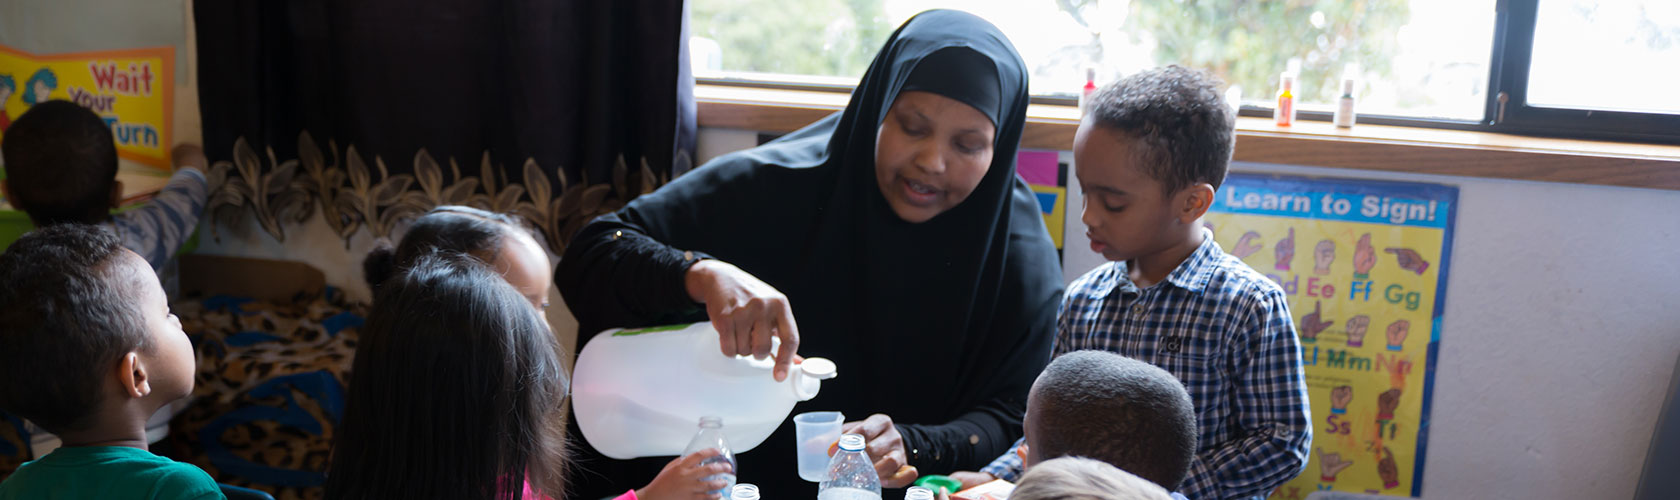 Caregiver pouring liquid into plastic cup while preschoolers surround her to watch.